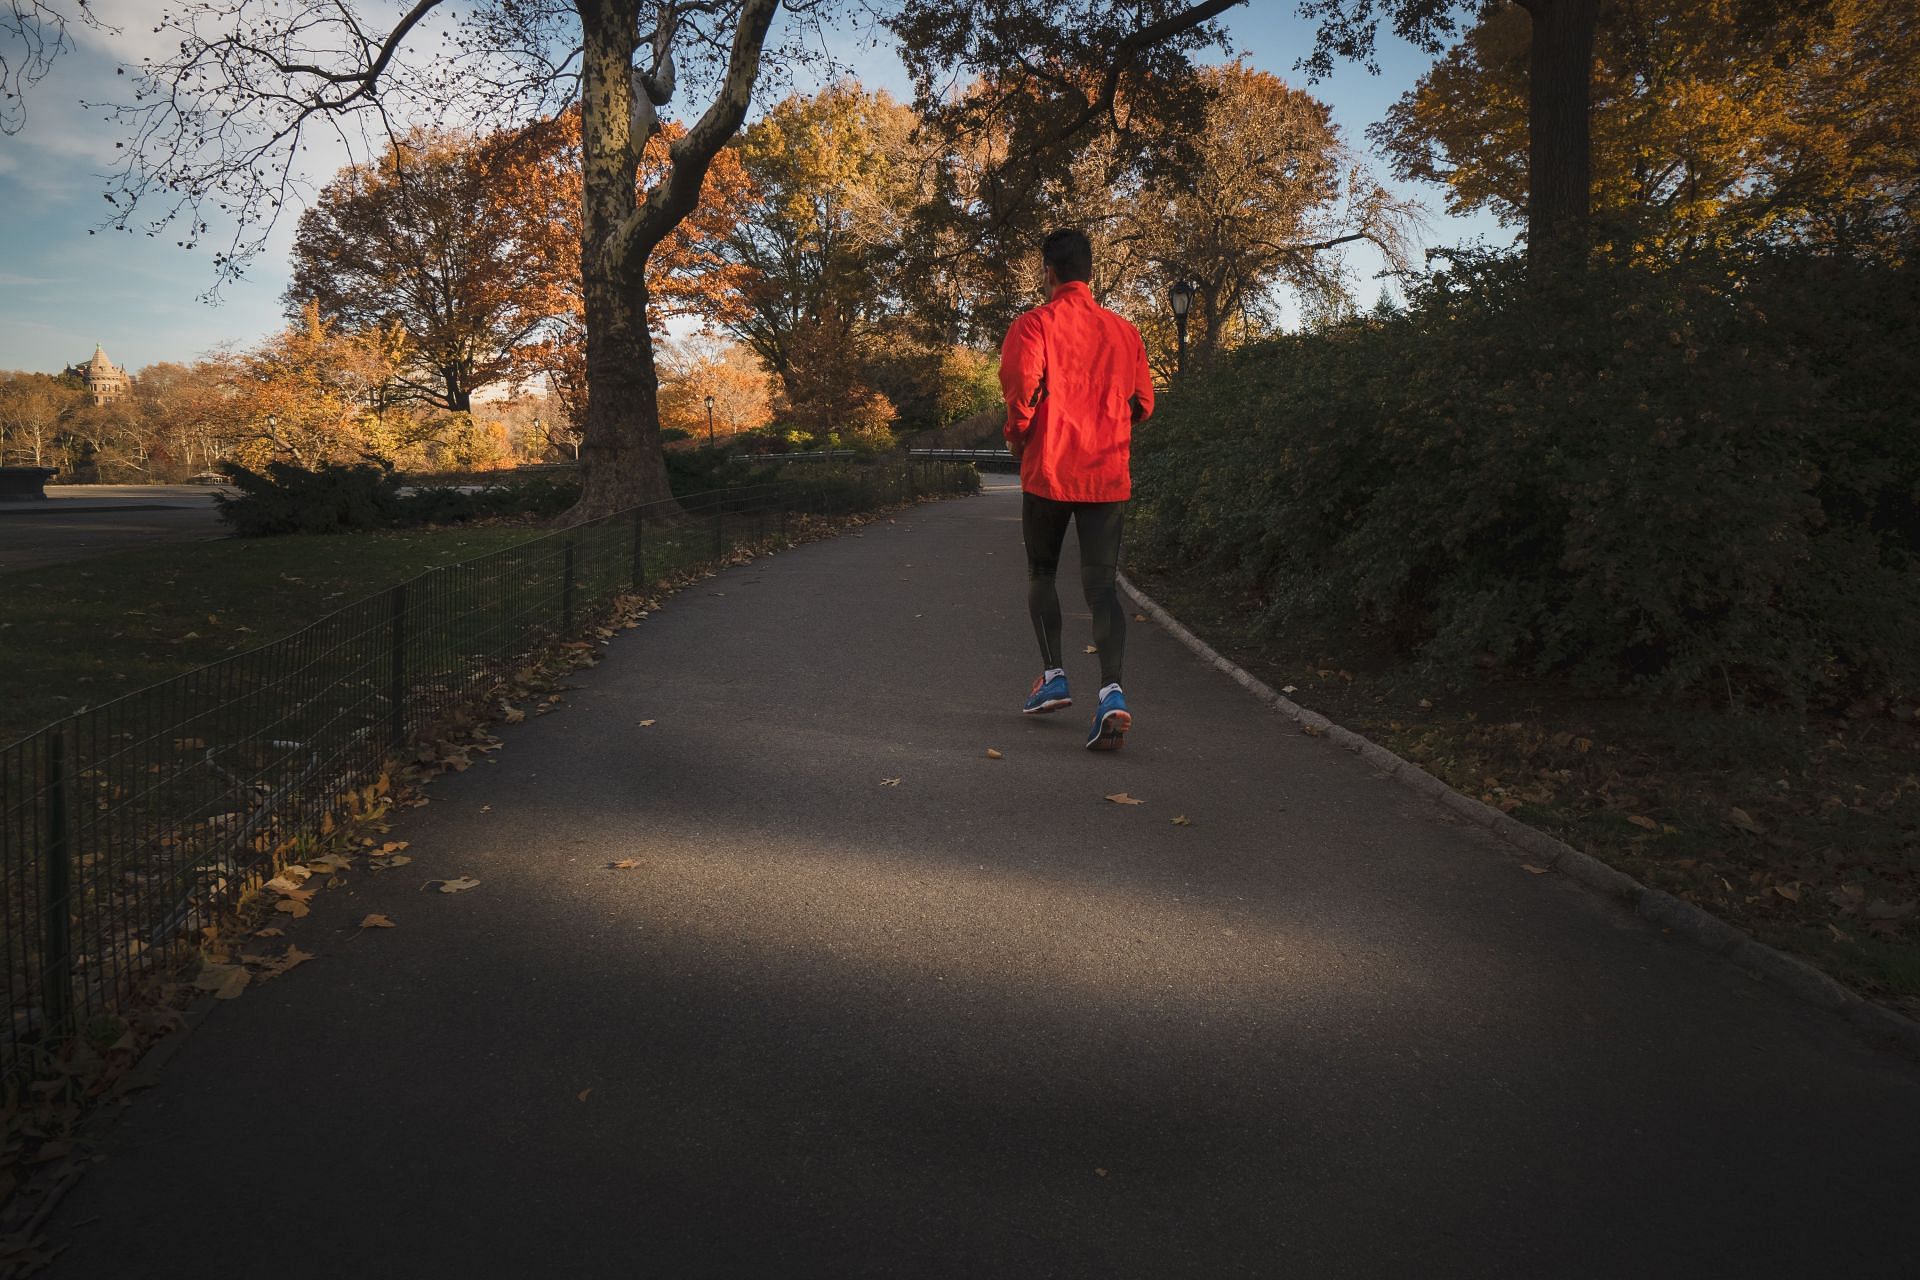 Add intervals to your walking workouts to scale up the intensity. (Image via Unsplash/ Arek Adeoye)